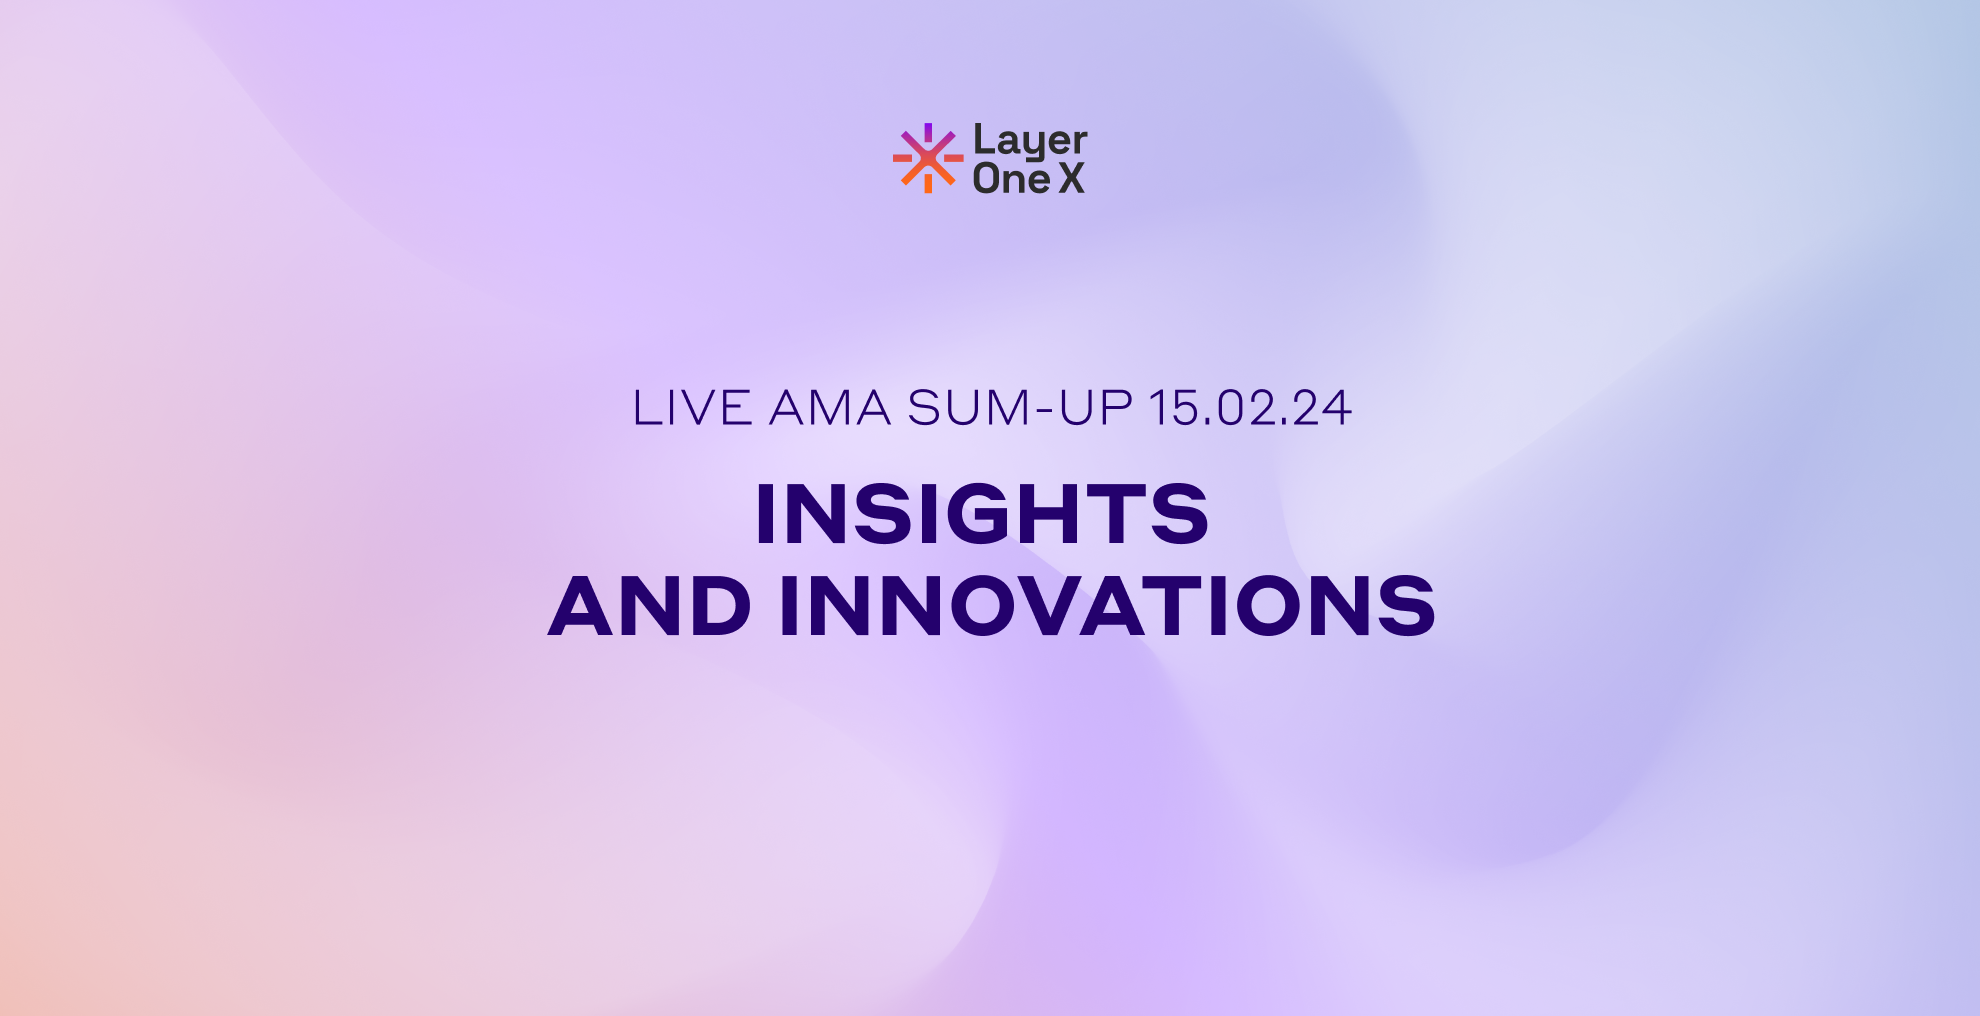 Sum-Up of the 15-02-2024 AMA with Layer One X: Insights and Innovations